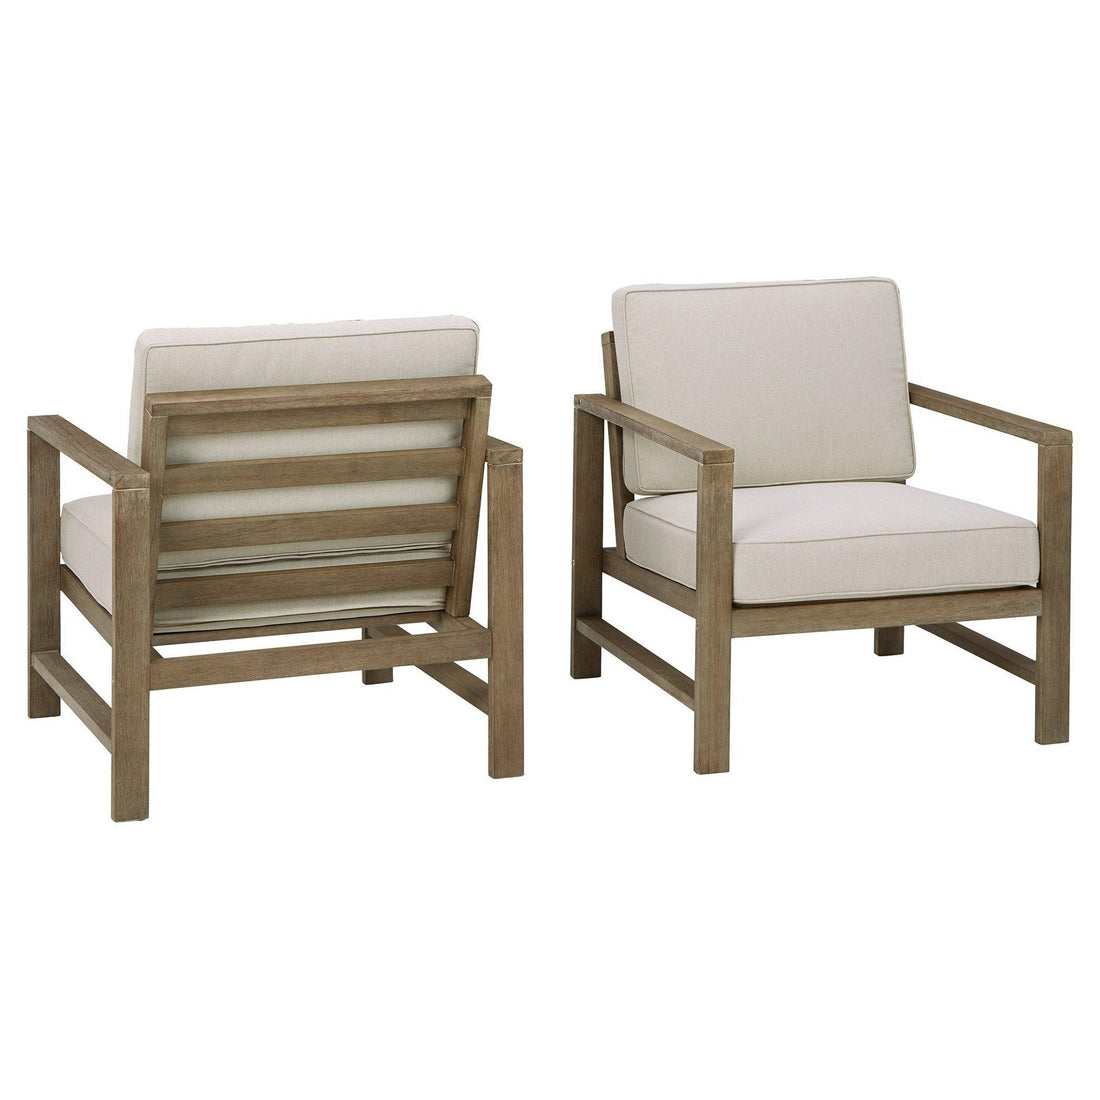 Fynnegan Lounge Chair with Cushion (Set of 2) Ash-P349-820